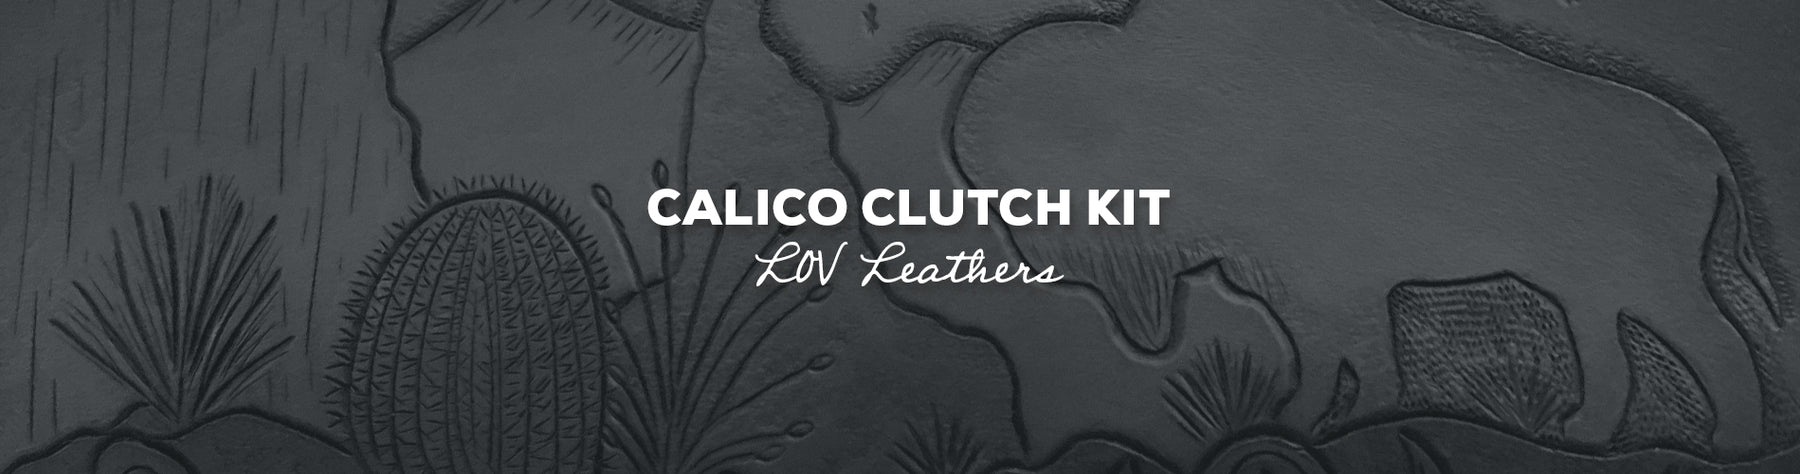 Gift Idea: Calico Kit with LOV Leathers